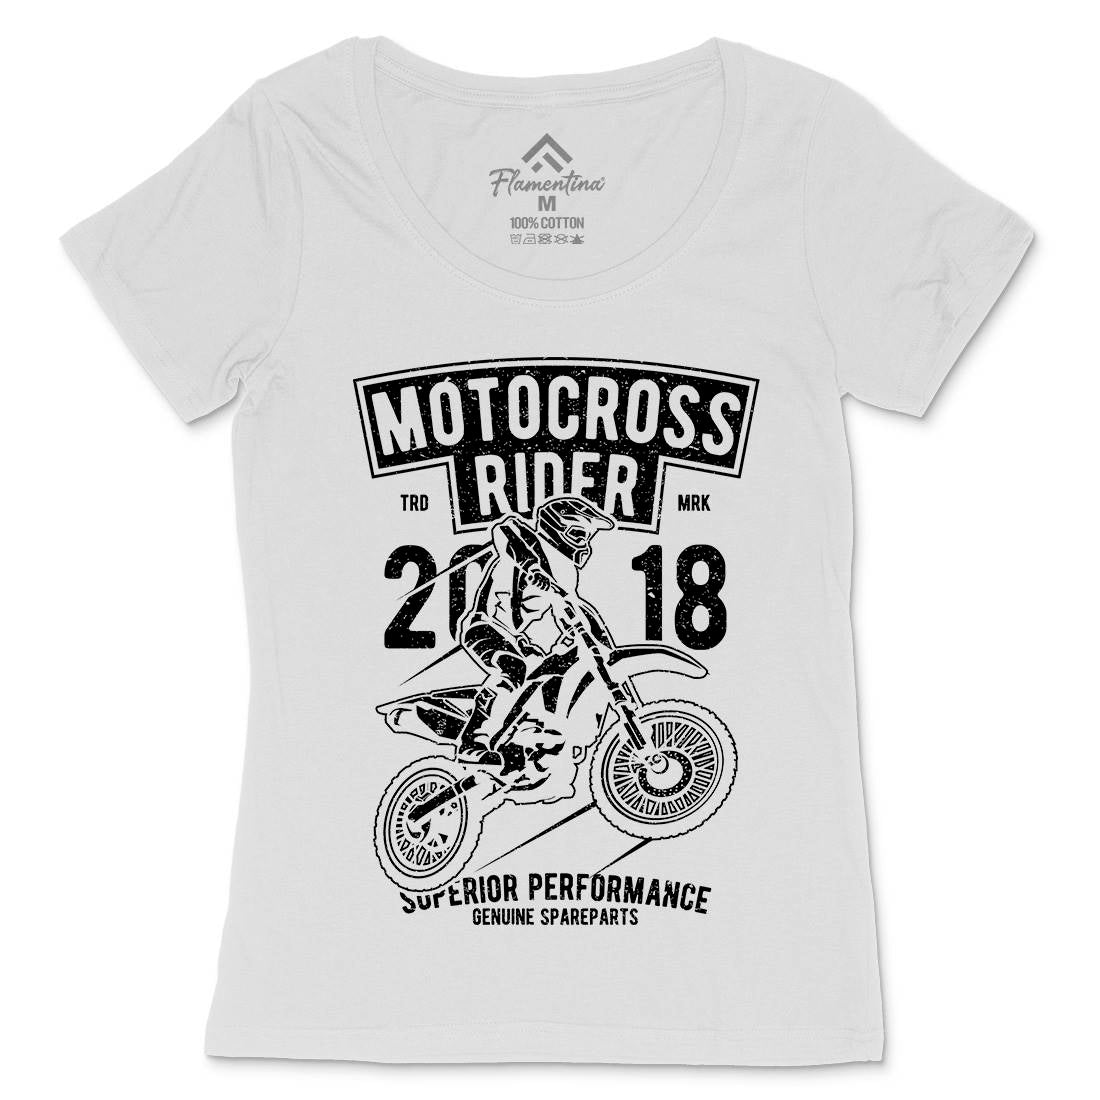 Motocross Rider Womens Scoop Neck T-Shirt Motorcycles A718